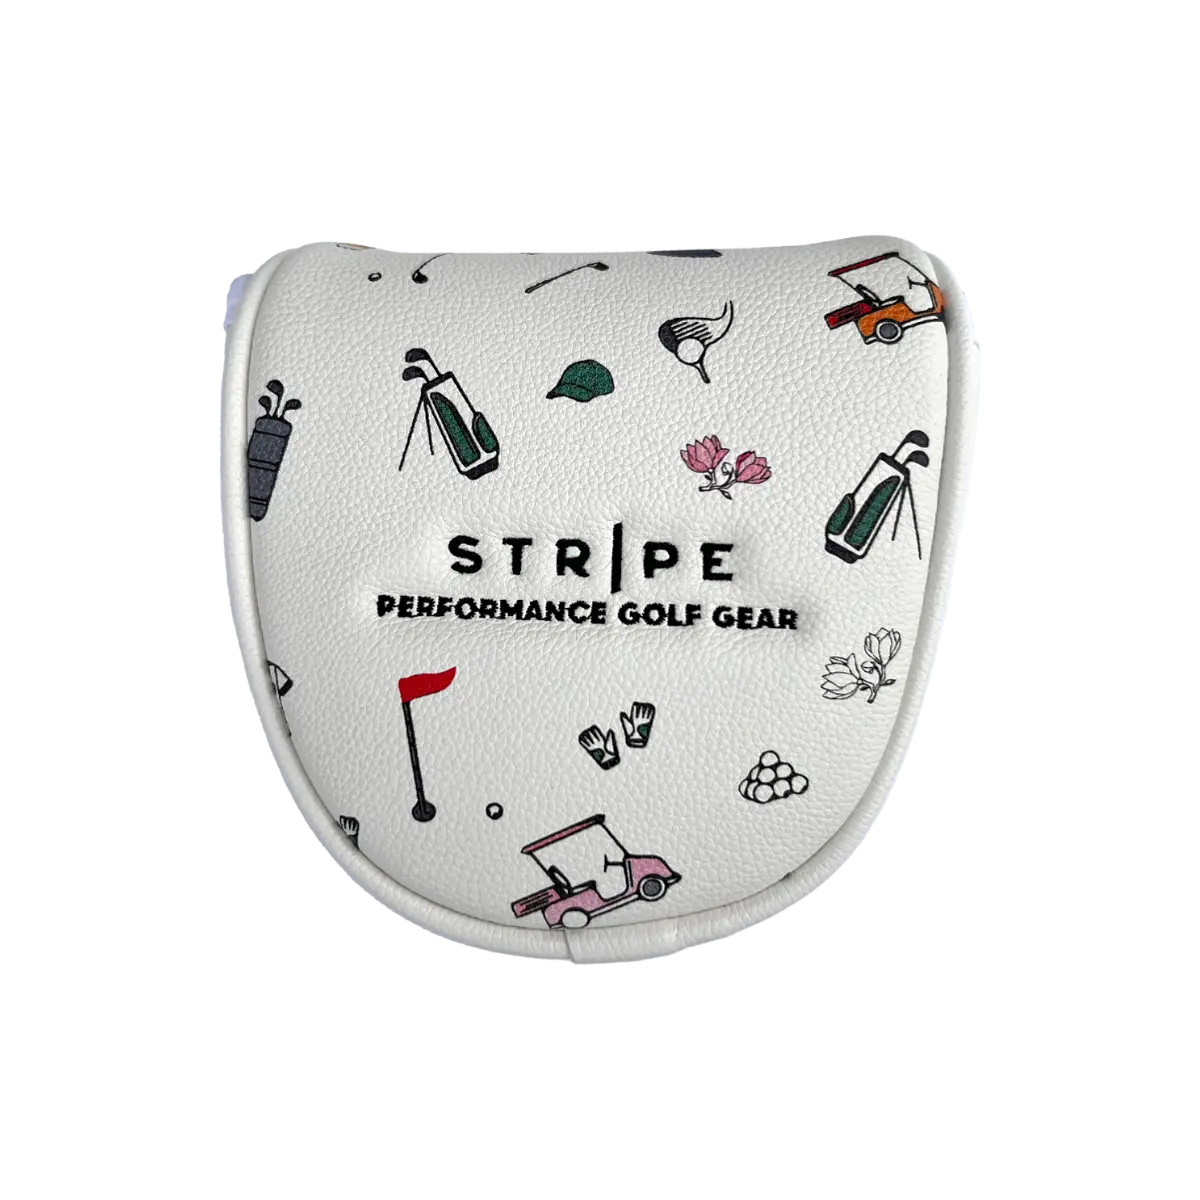 Headcover mallet putter front - Stripe golf